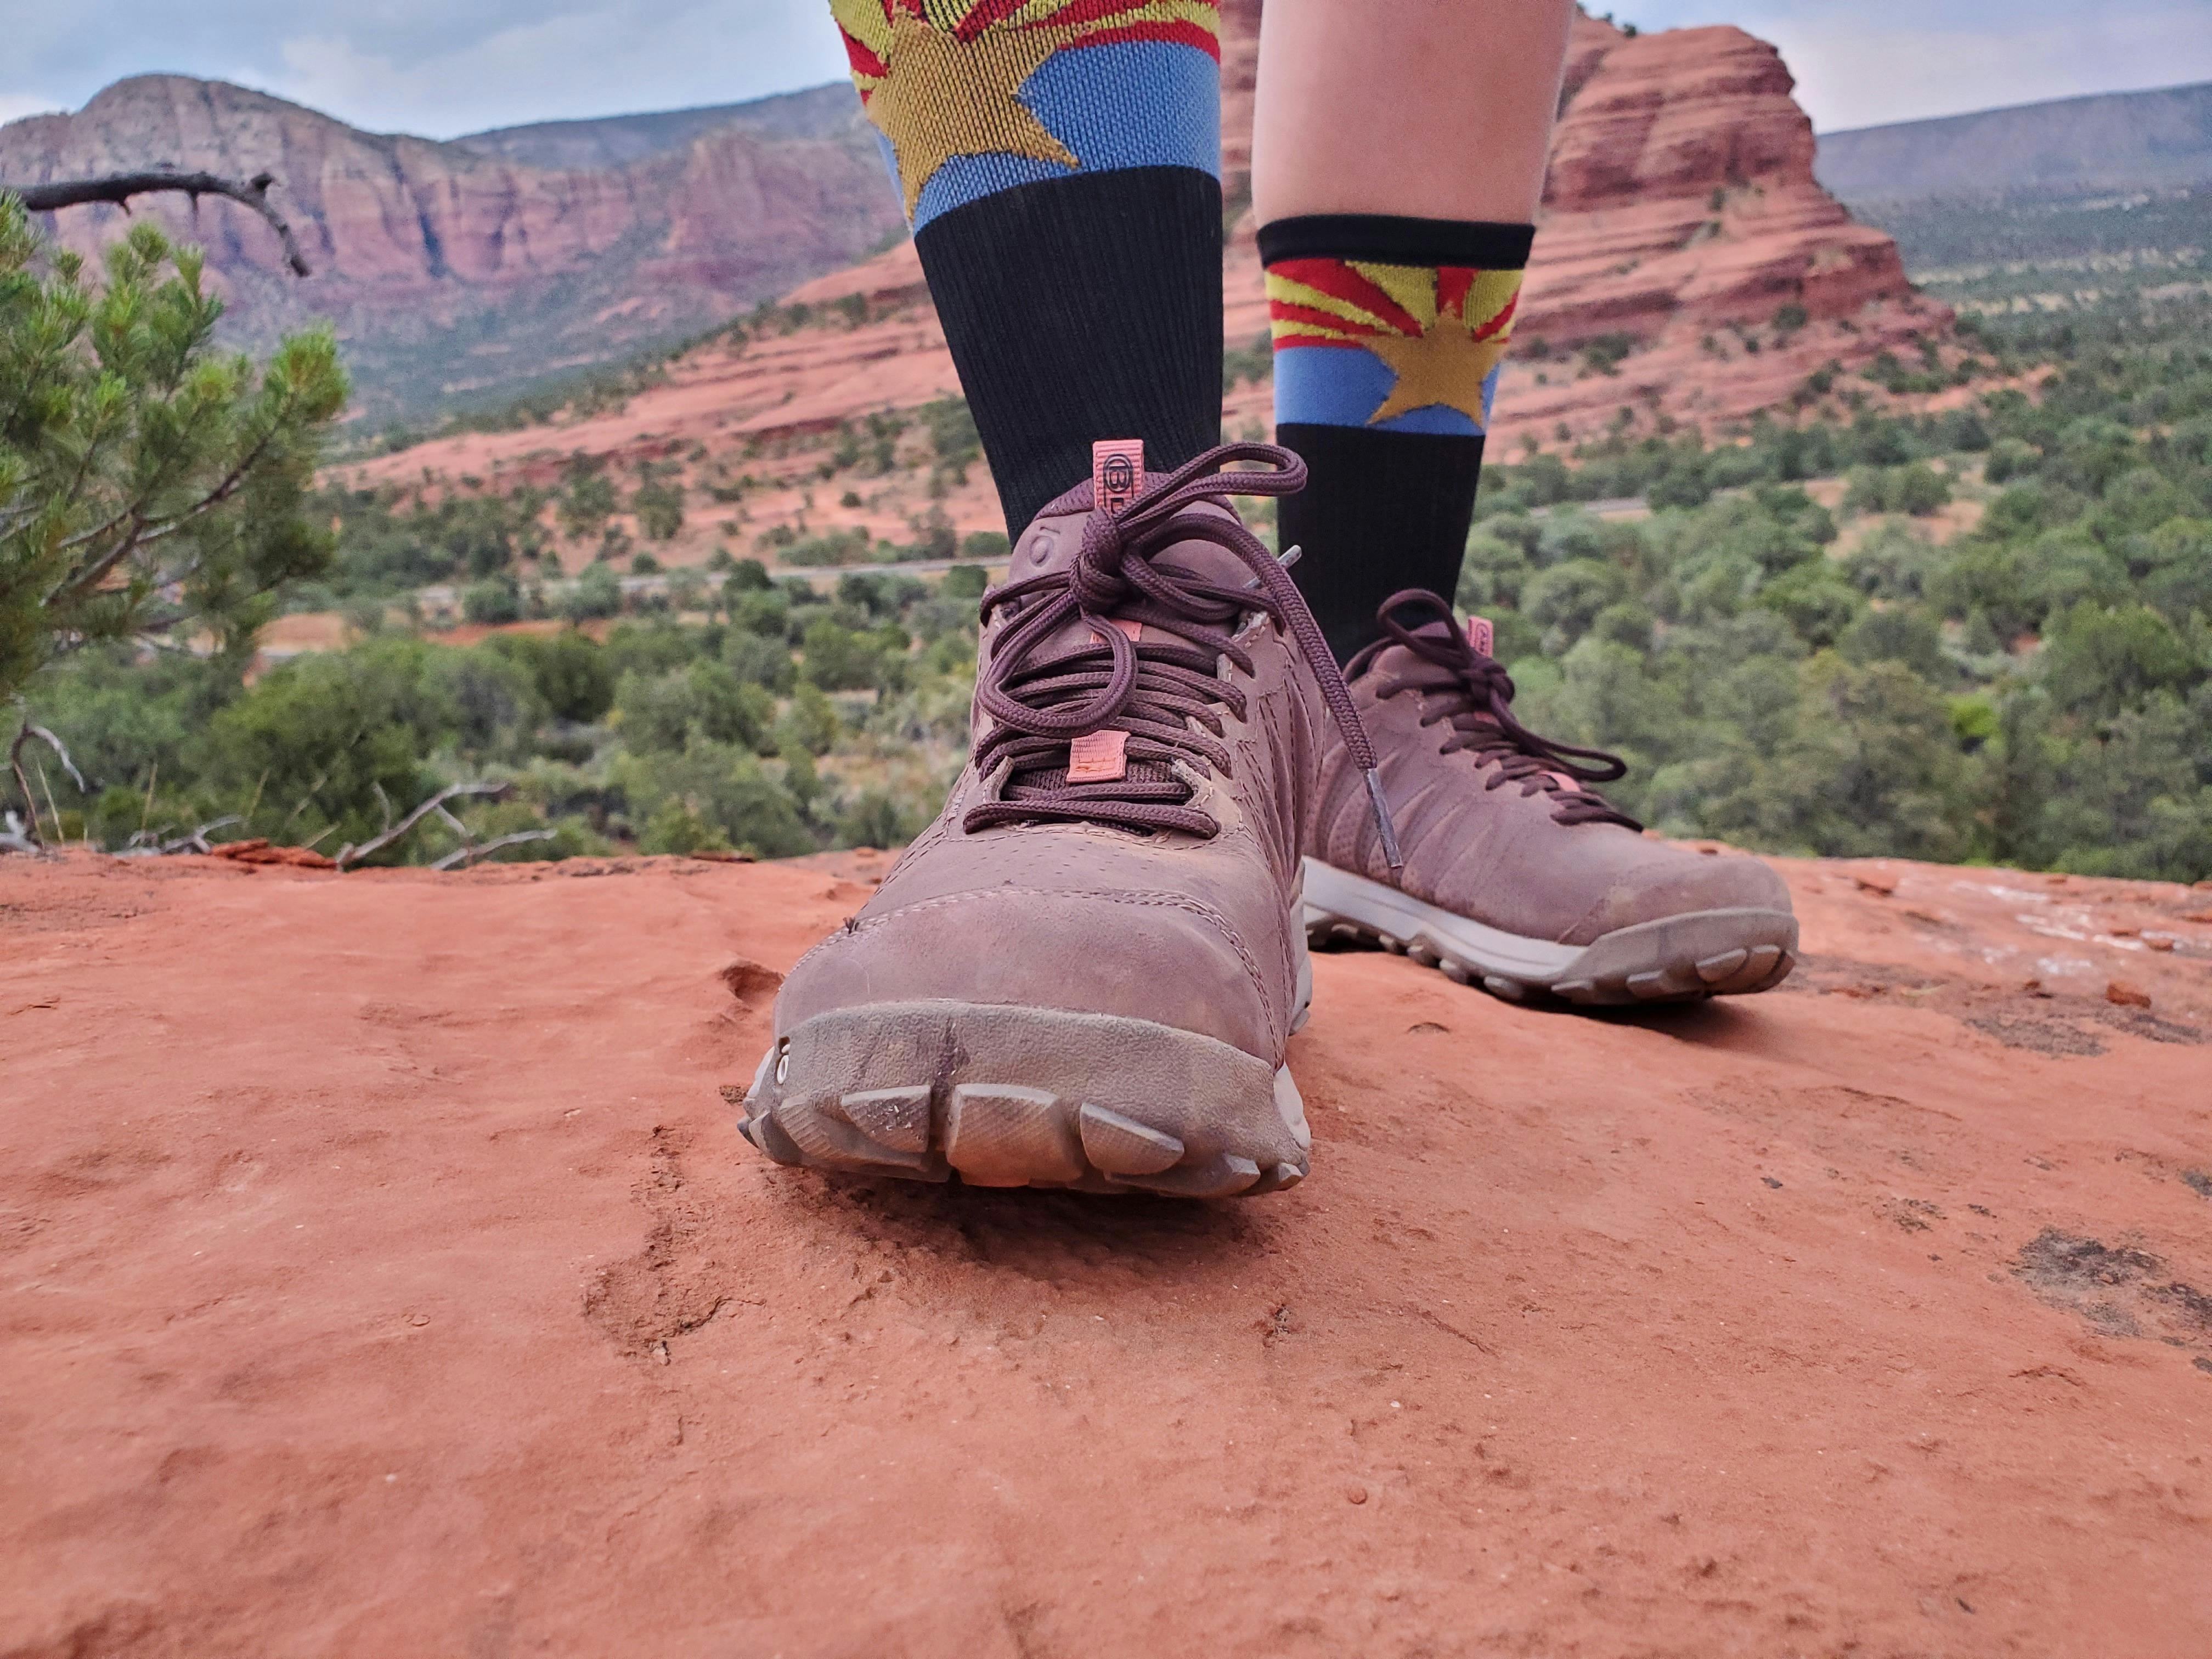 Oboz Sypes low hiking shoes on foot in the desert.